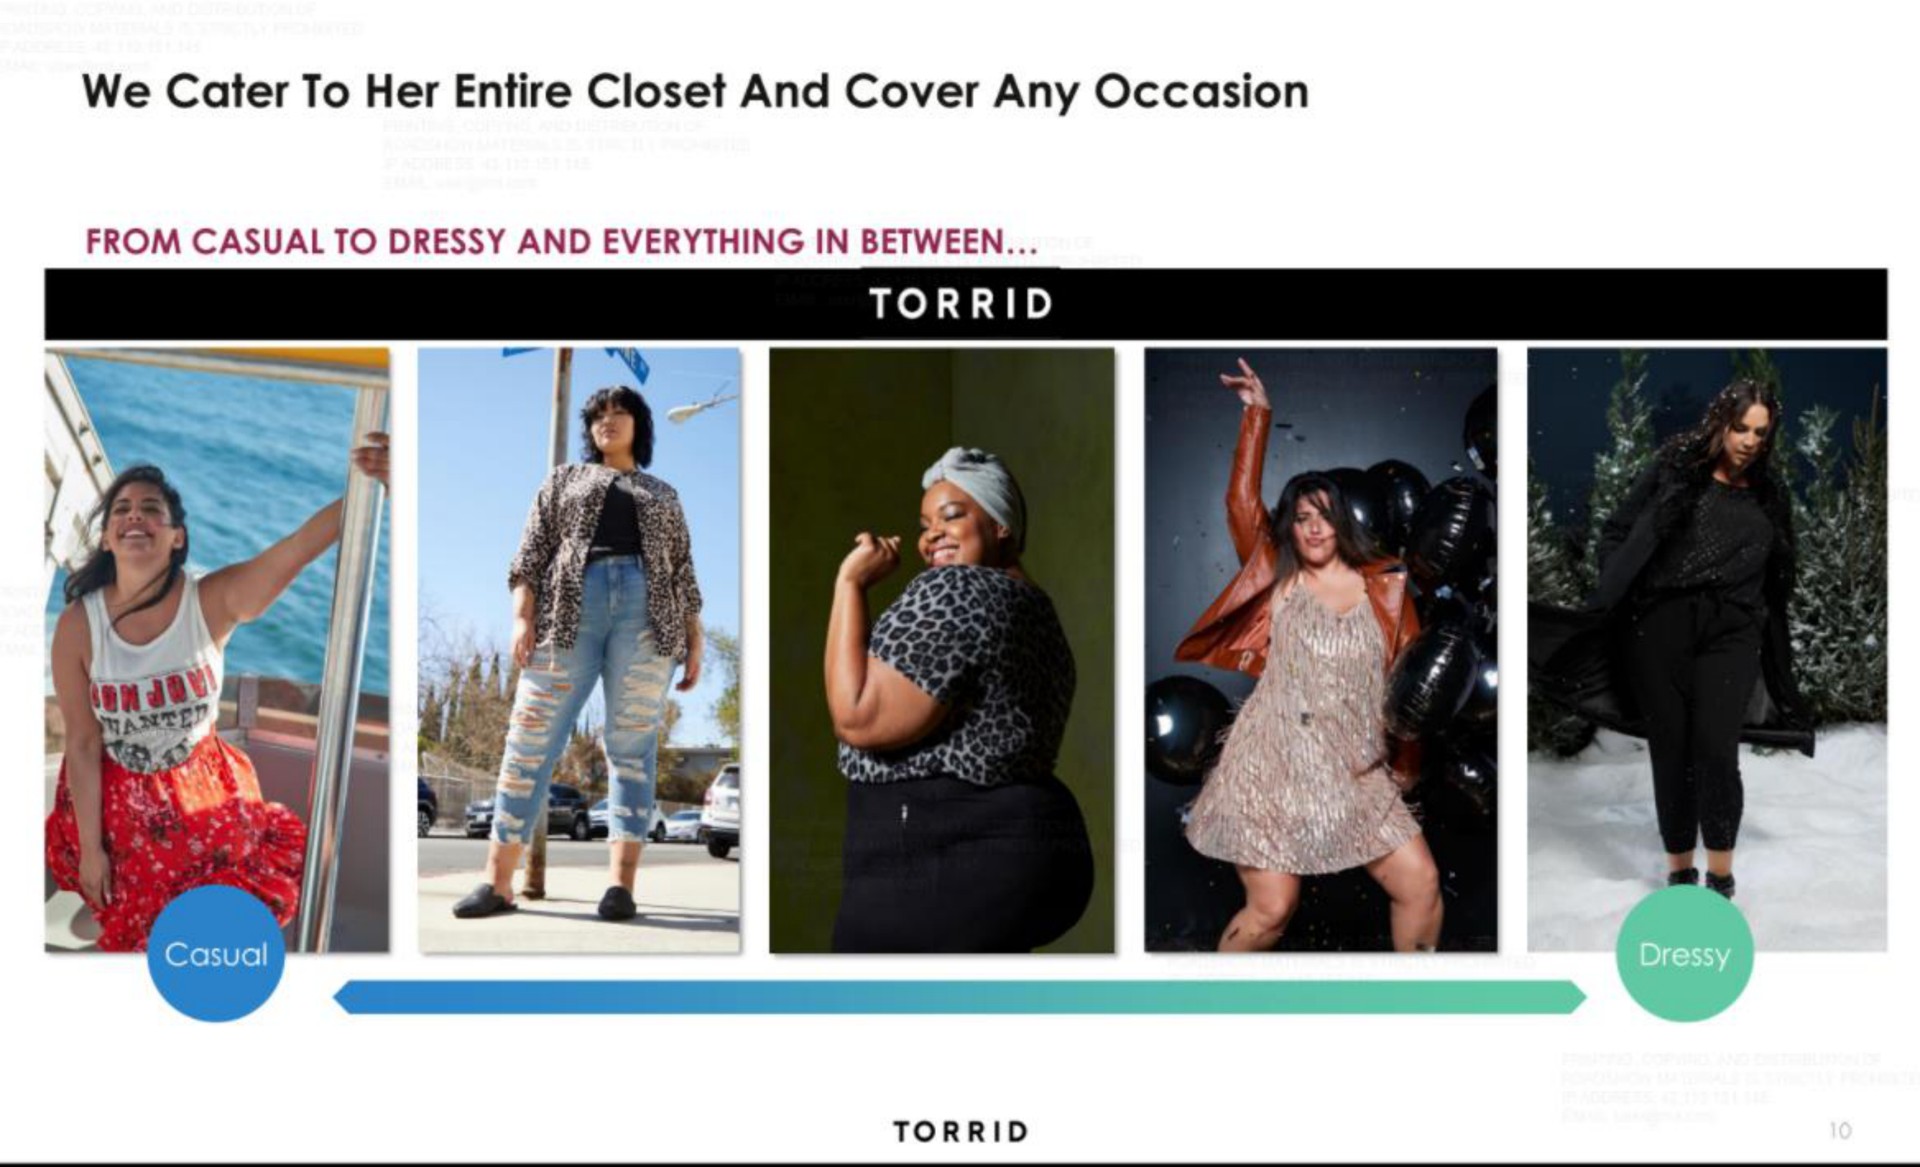 we cater to her entire closet and cover any occasion | Torrid